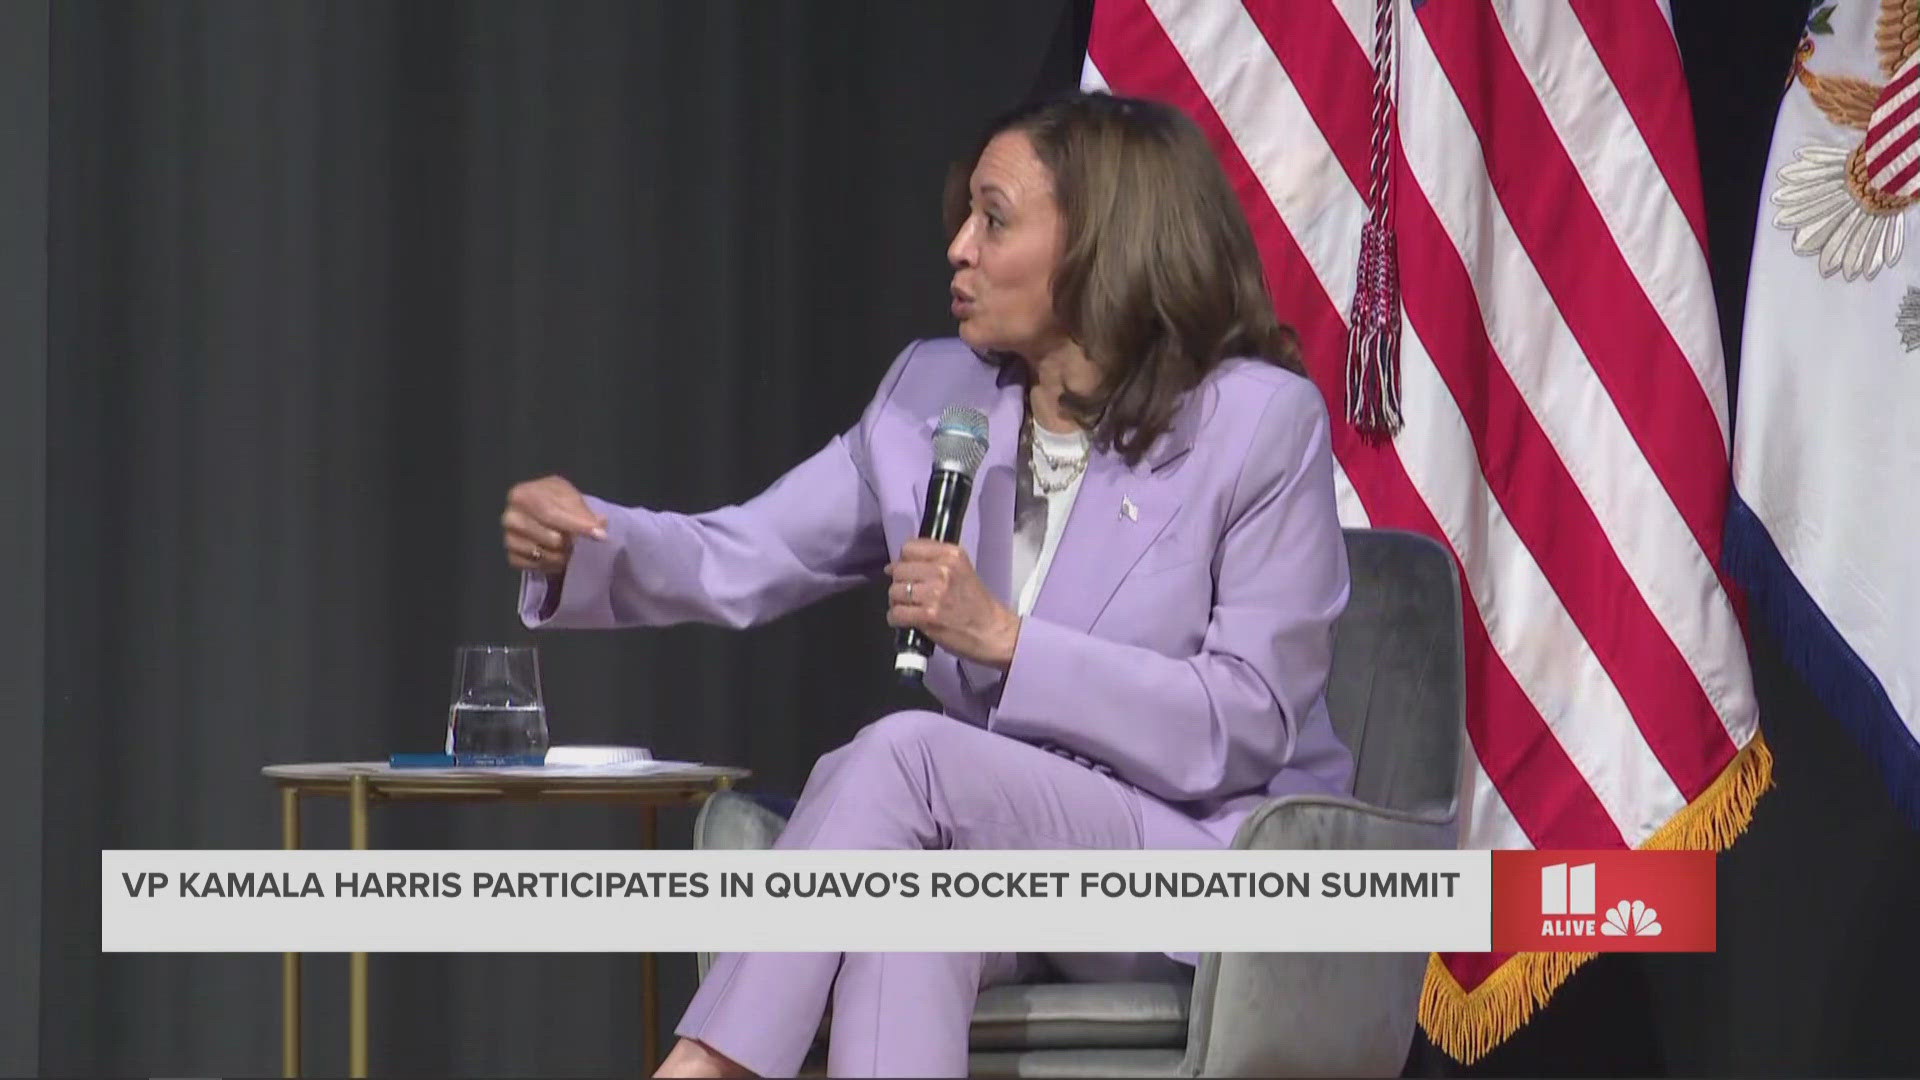 VP Kamala Harris spoke at the Rocket Foundation Summit on prioritizing mental health, especially for the youth, amid gun violence.